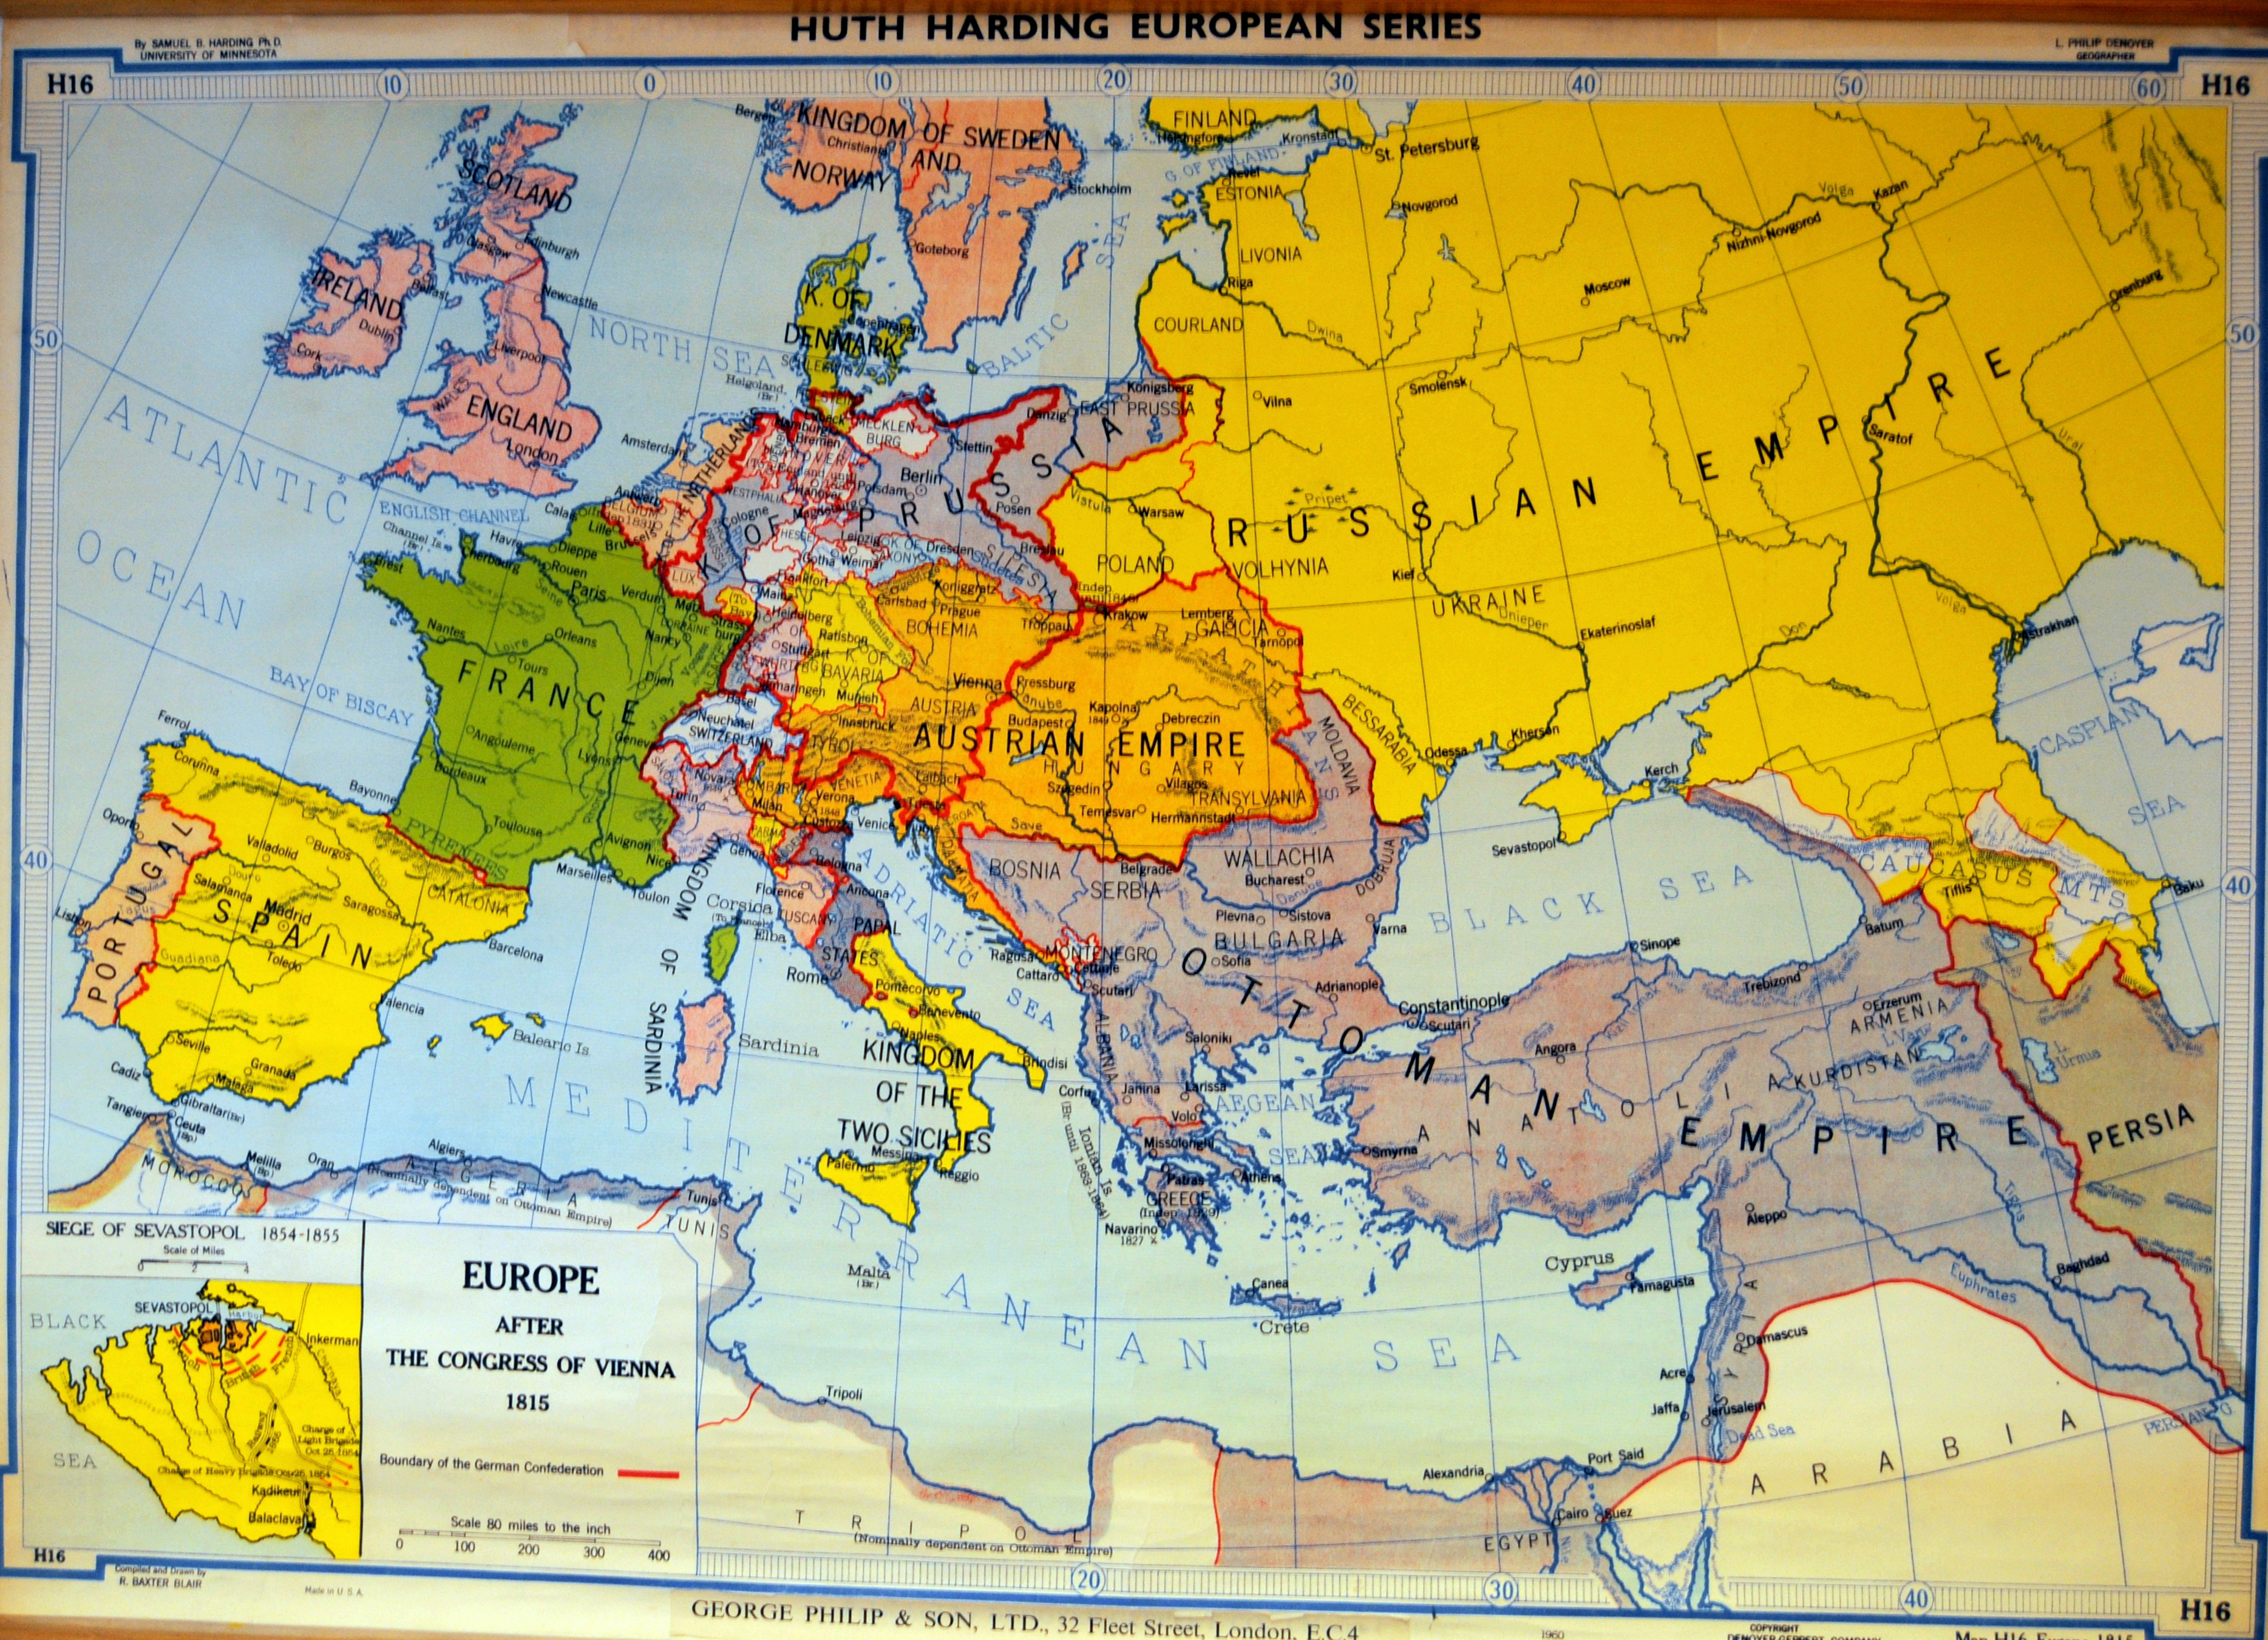 Congress of Vienna, intended to redraw Europe's political map after the defeat of Napoléon the previous spring